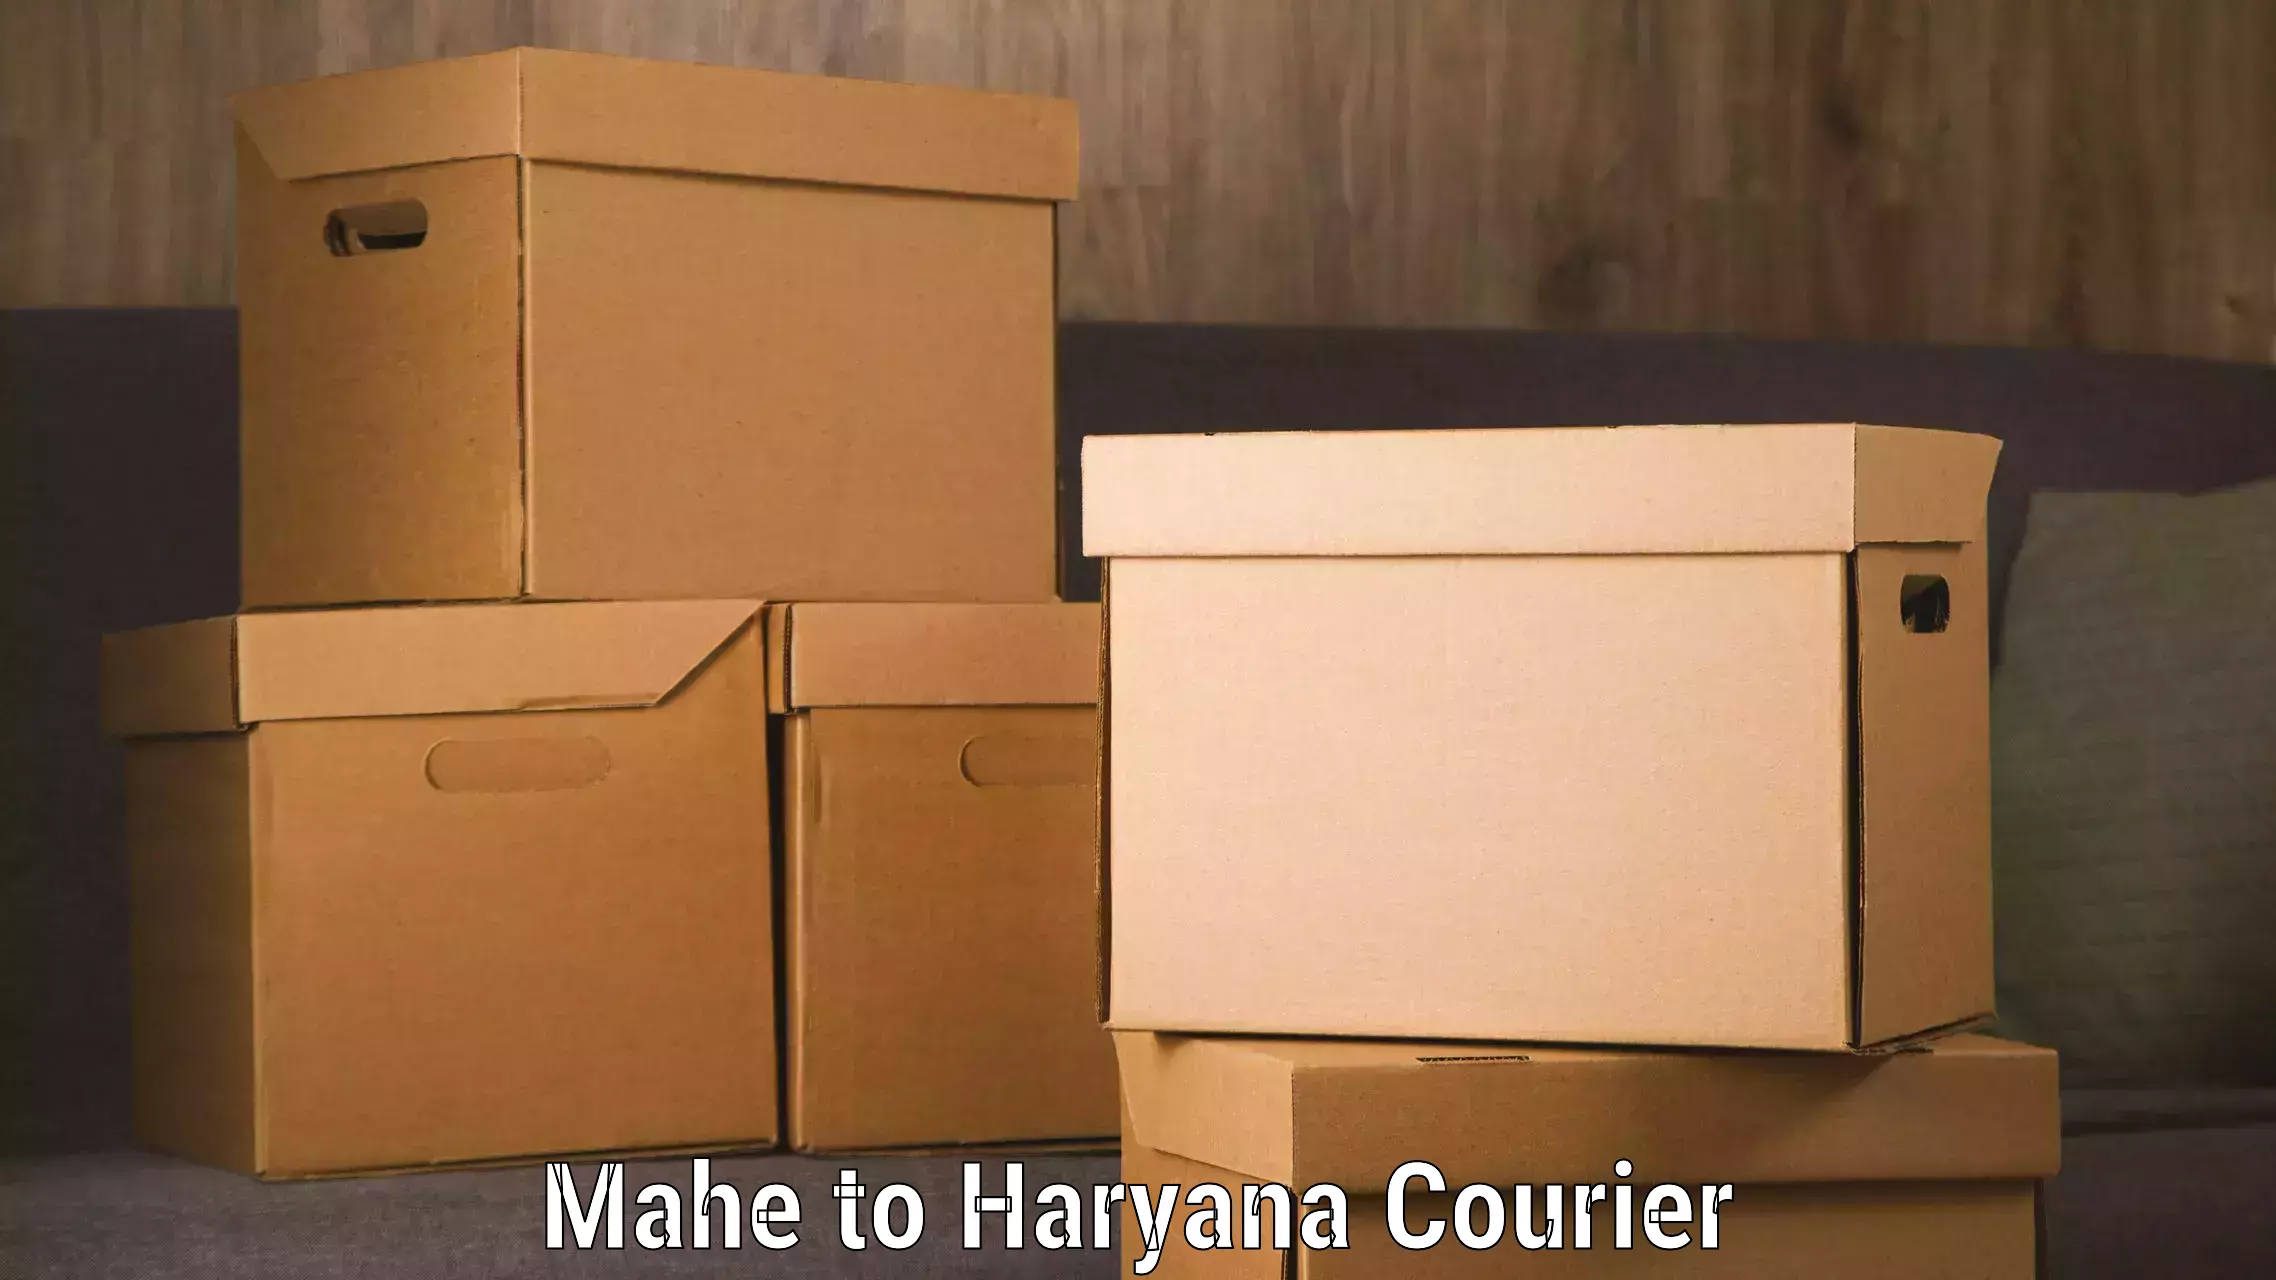 End-to-end delivery Mahe to Haryana